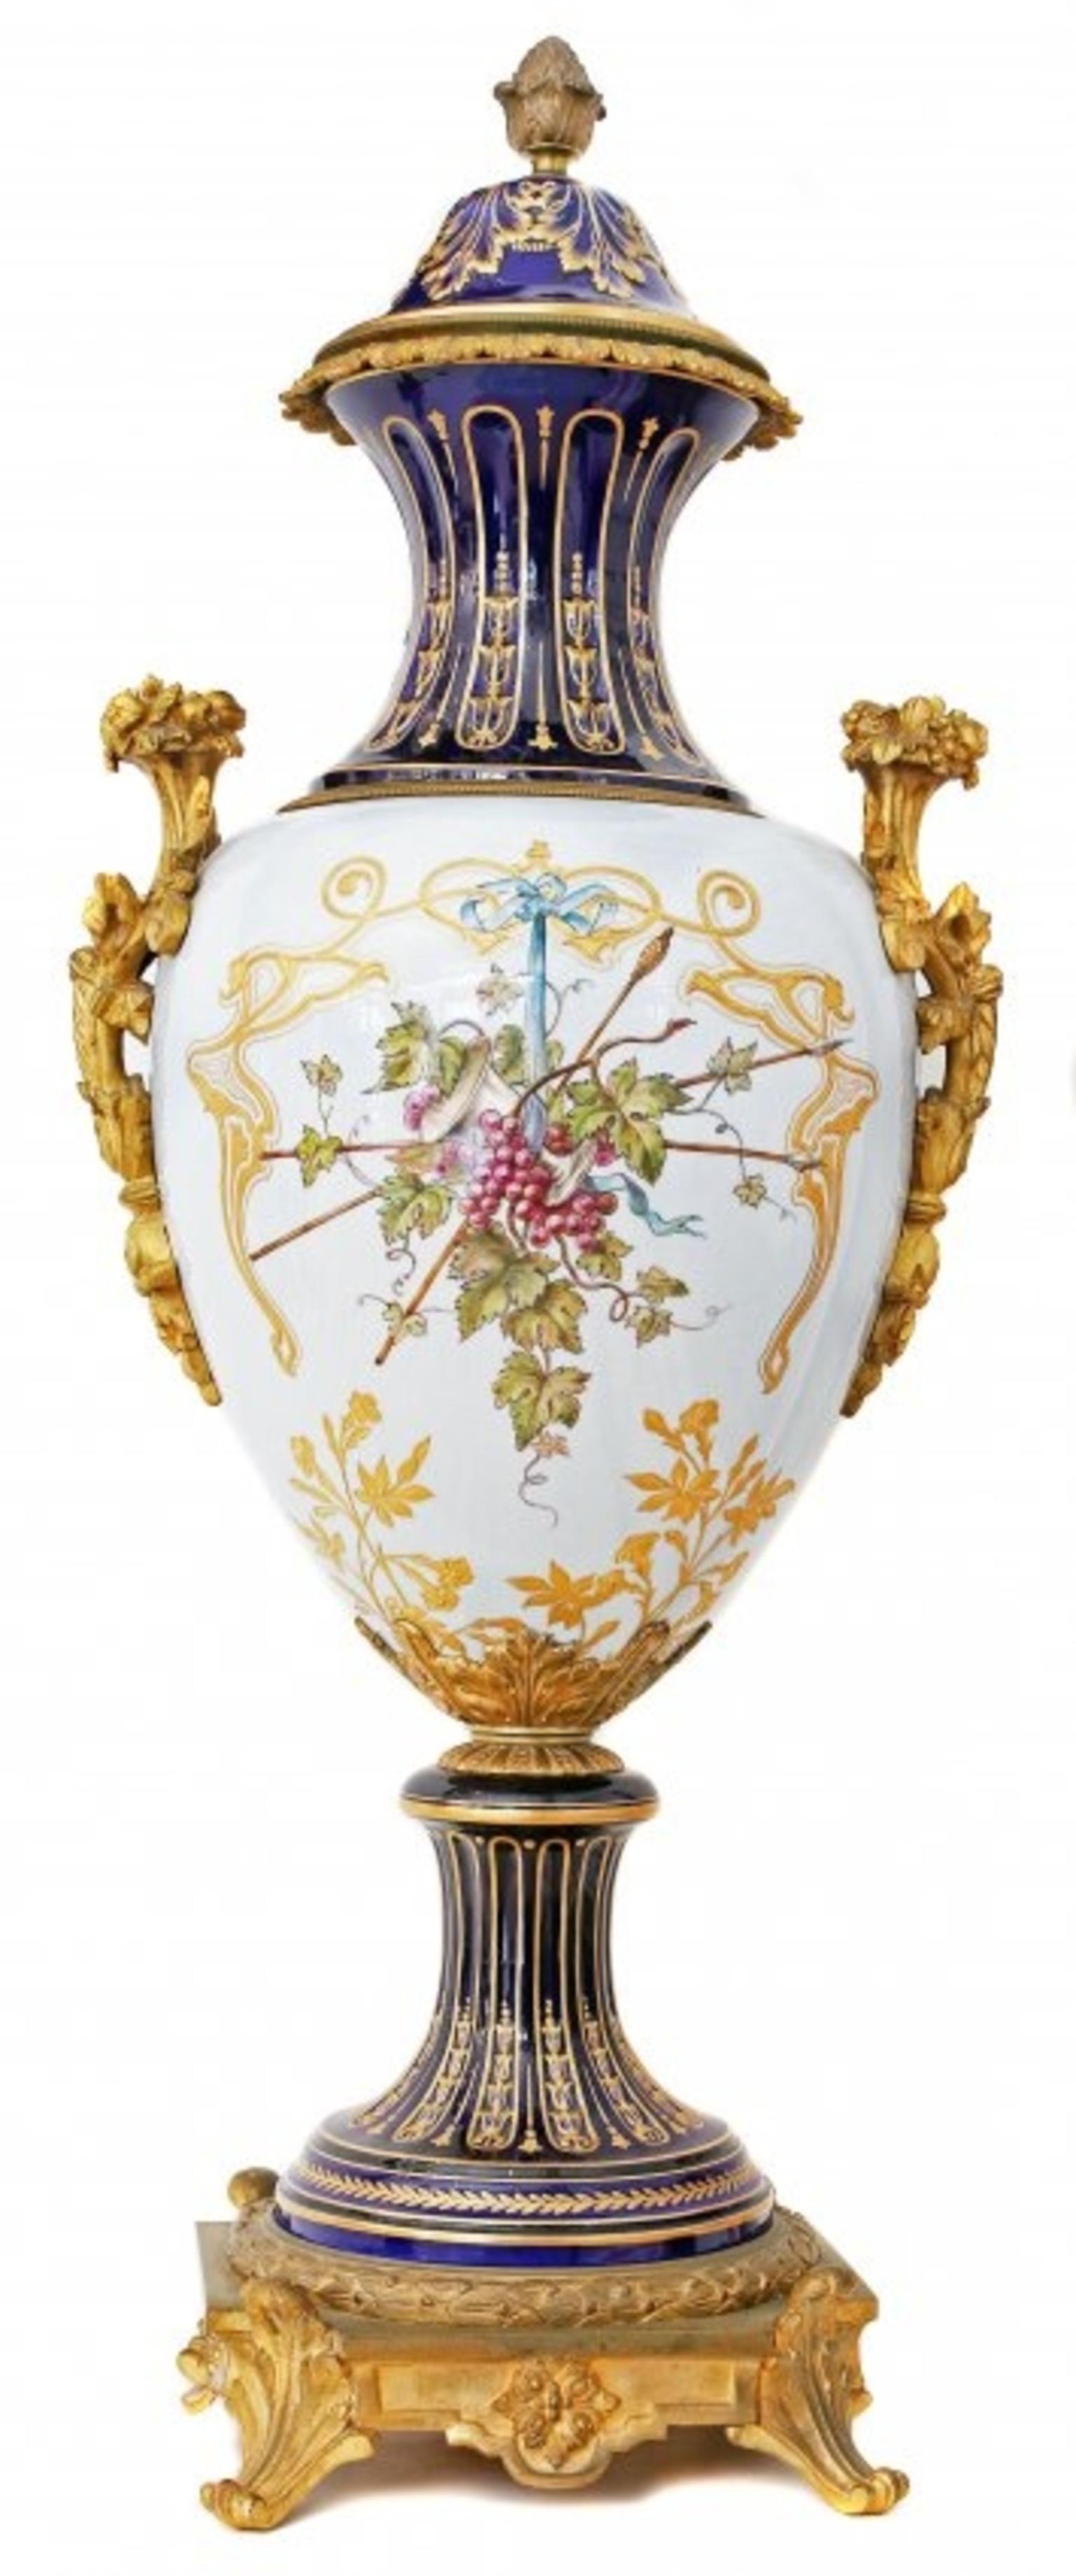 Fine Pair of Sevres Gilt Bronze-Mounted Painted, Parcel-Gilt Porcelain Vases In Good Condition For Sale In West Palm Beach, FL